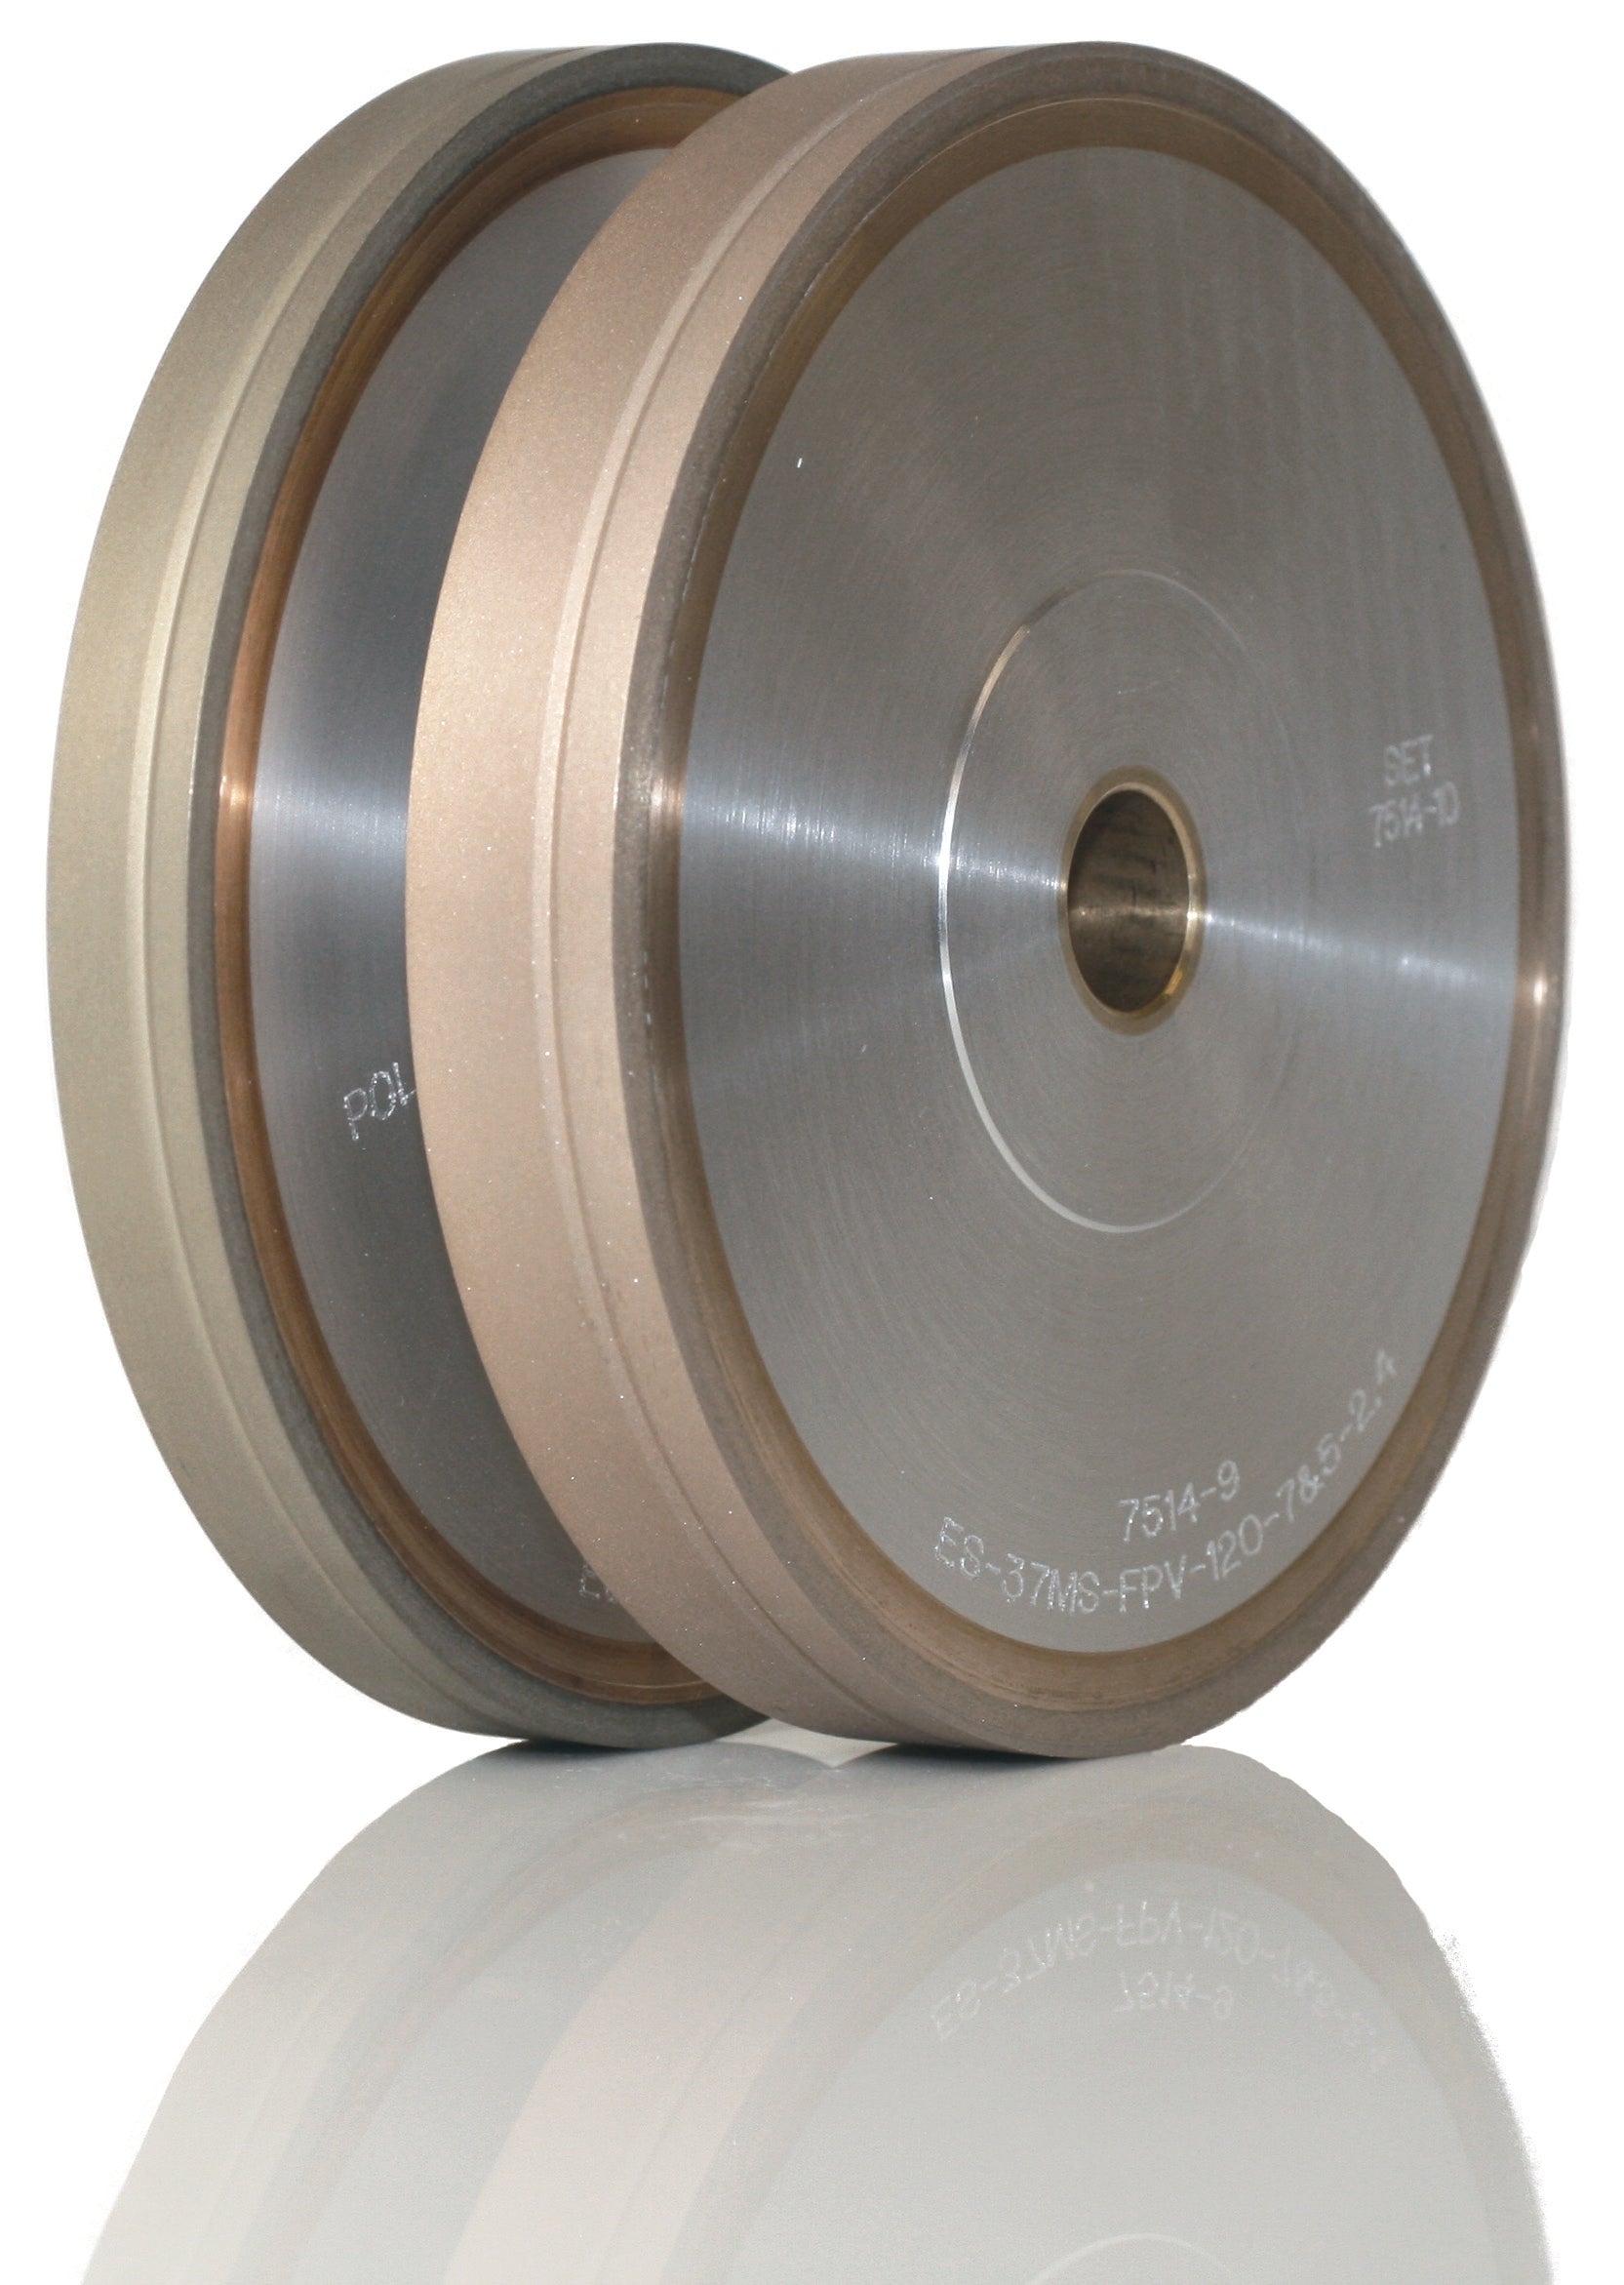 GERBER ROUGHING WHEEL FOR GLASS 21mm